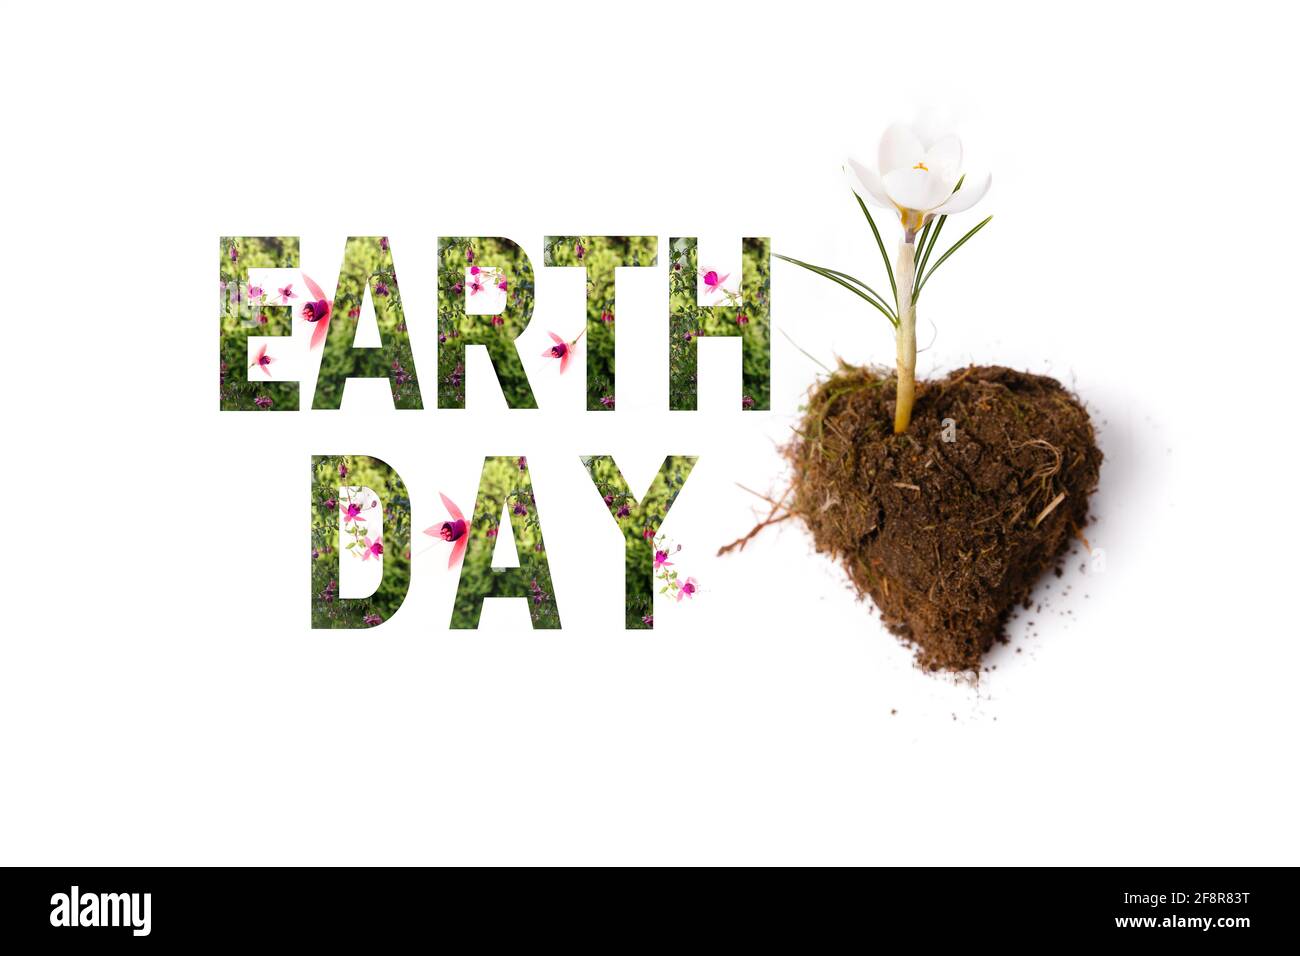 World earth day concept. Lettering Earth day with plants and wonderful flowers Stock Photo